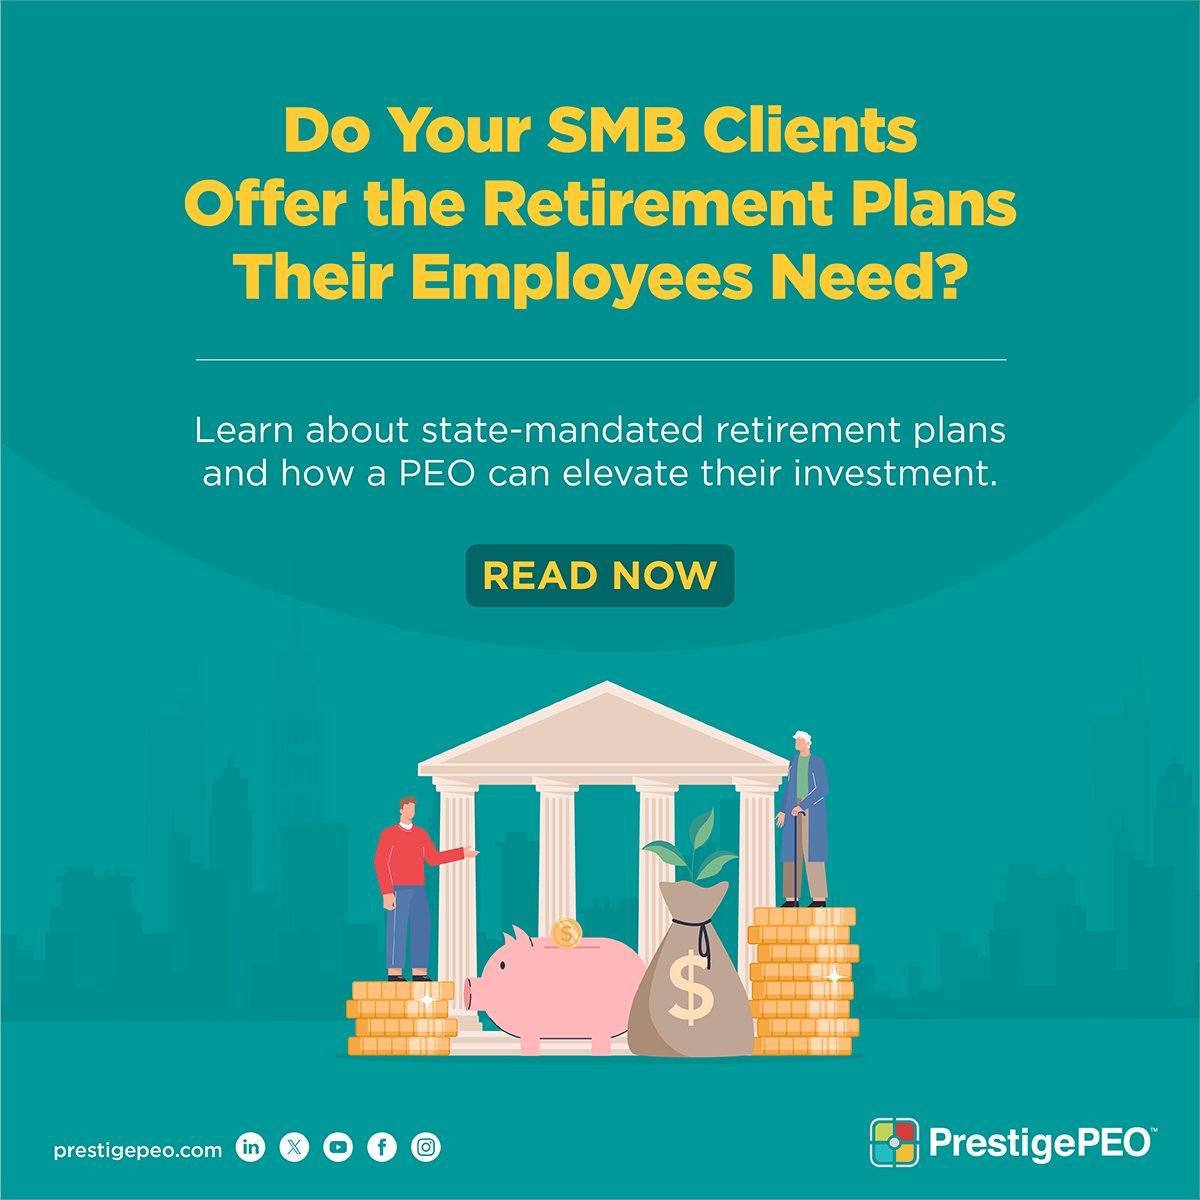 Are you ready to talk with your clients about state-mandated retirement plans? Brush up on the basics and learn how #PEO #retirementplans help your client pave the way for their workers to start investing in their future. bit.ly/3UNzQTI